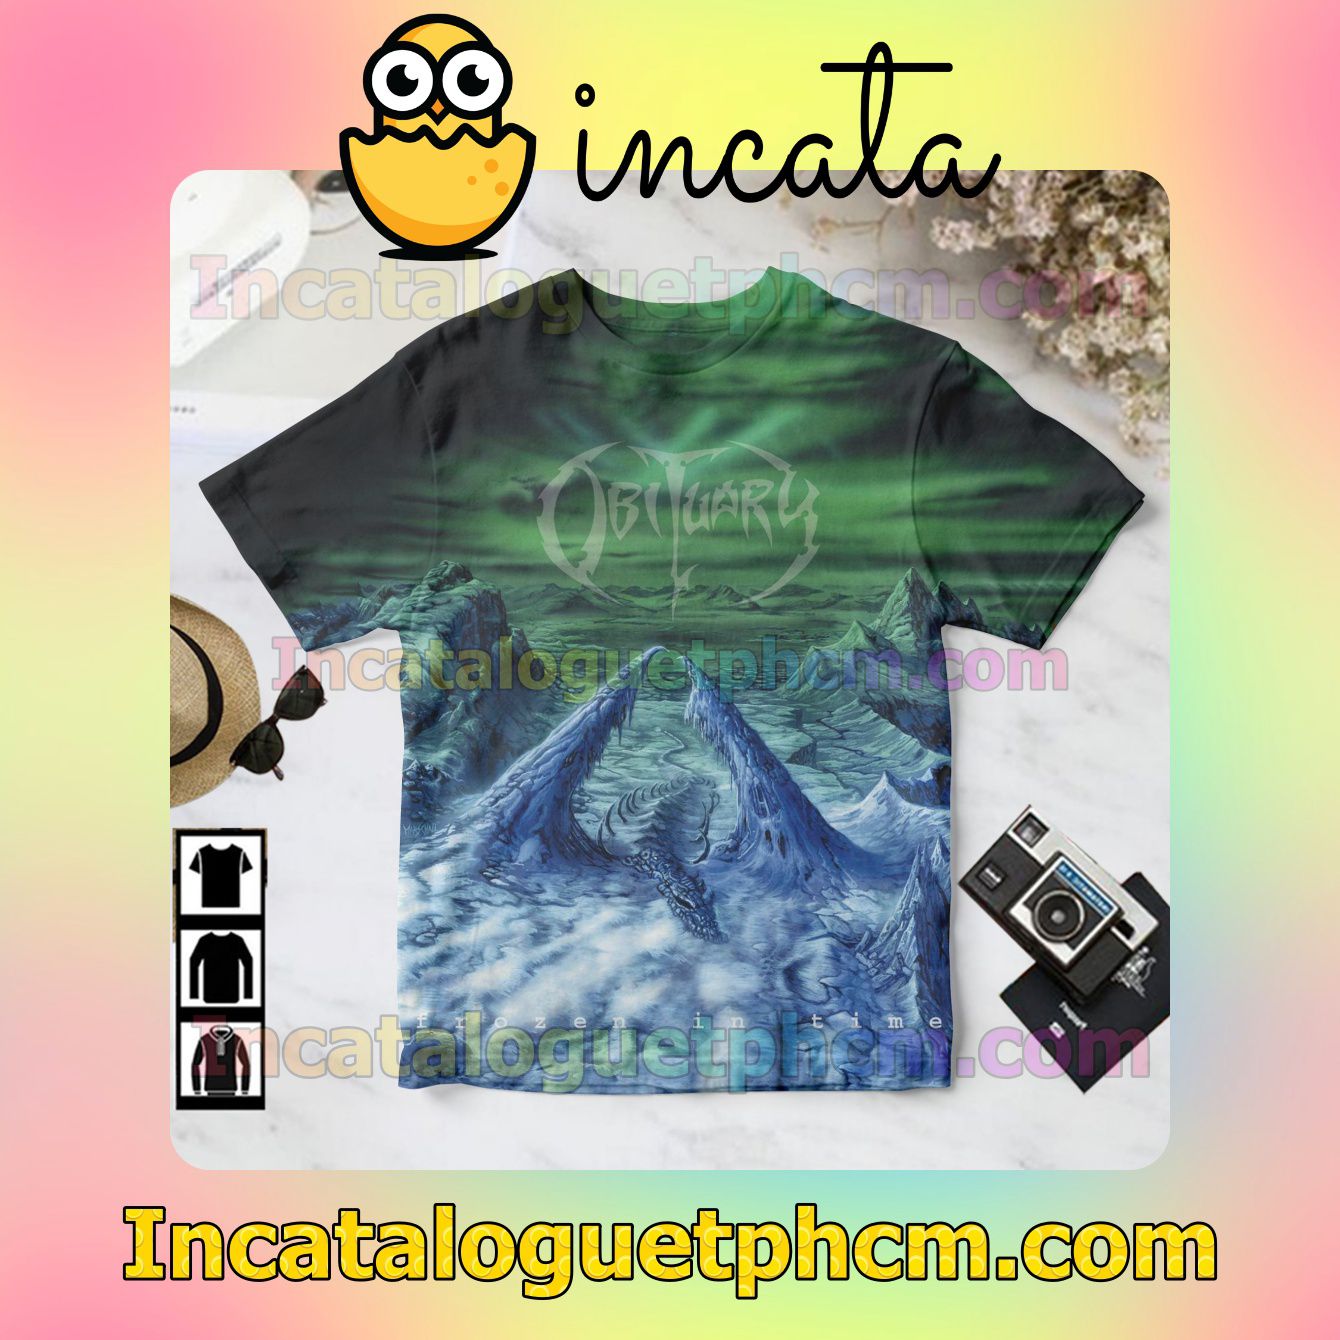 Obituary Frozen In Time Album Cover For Fan Shirt